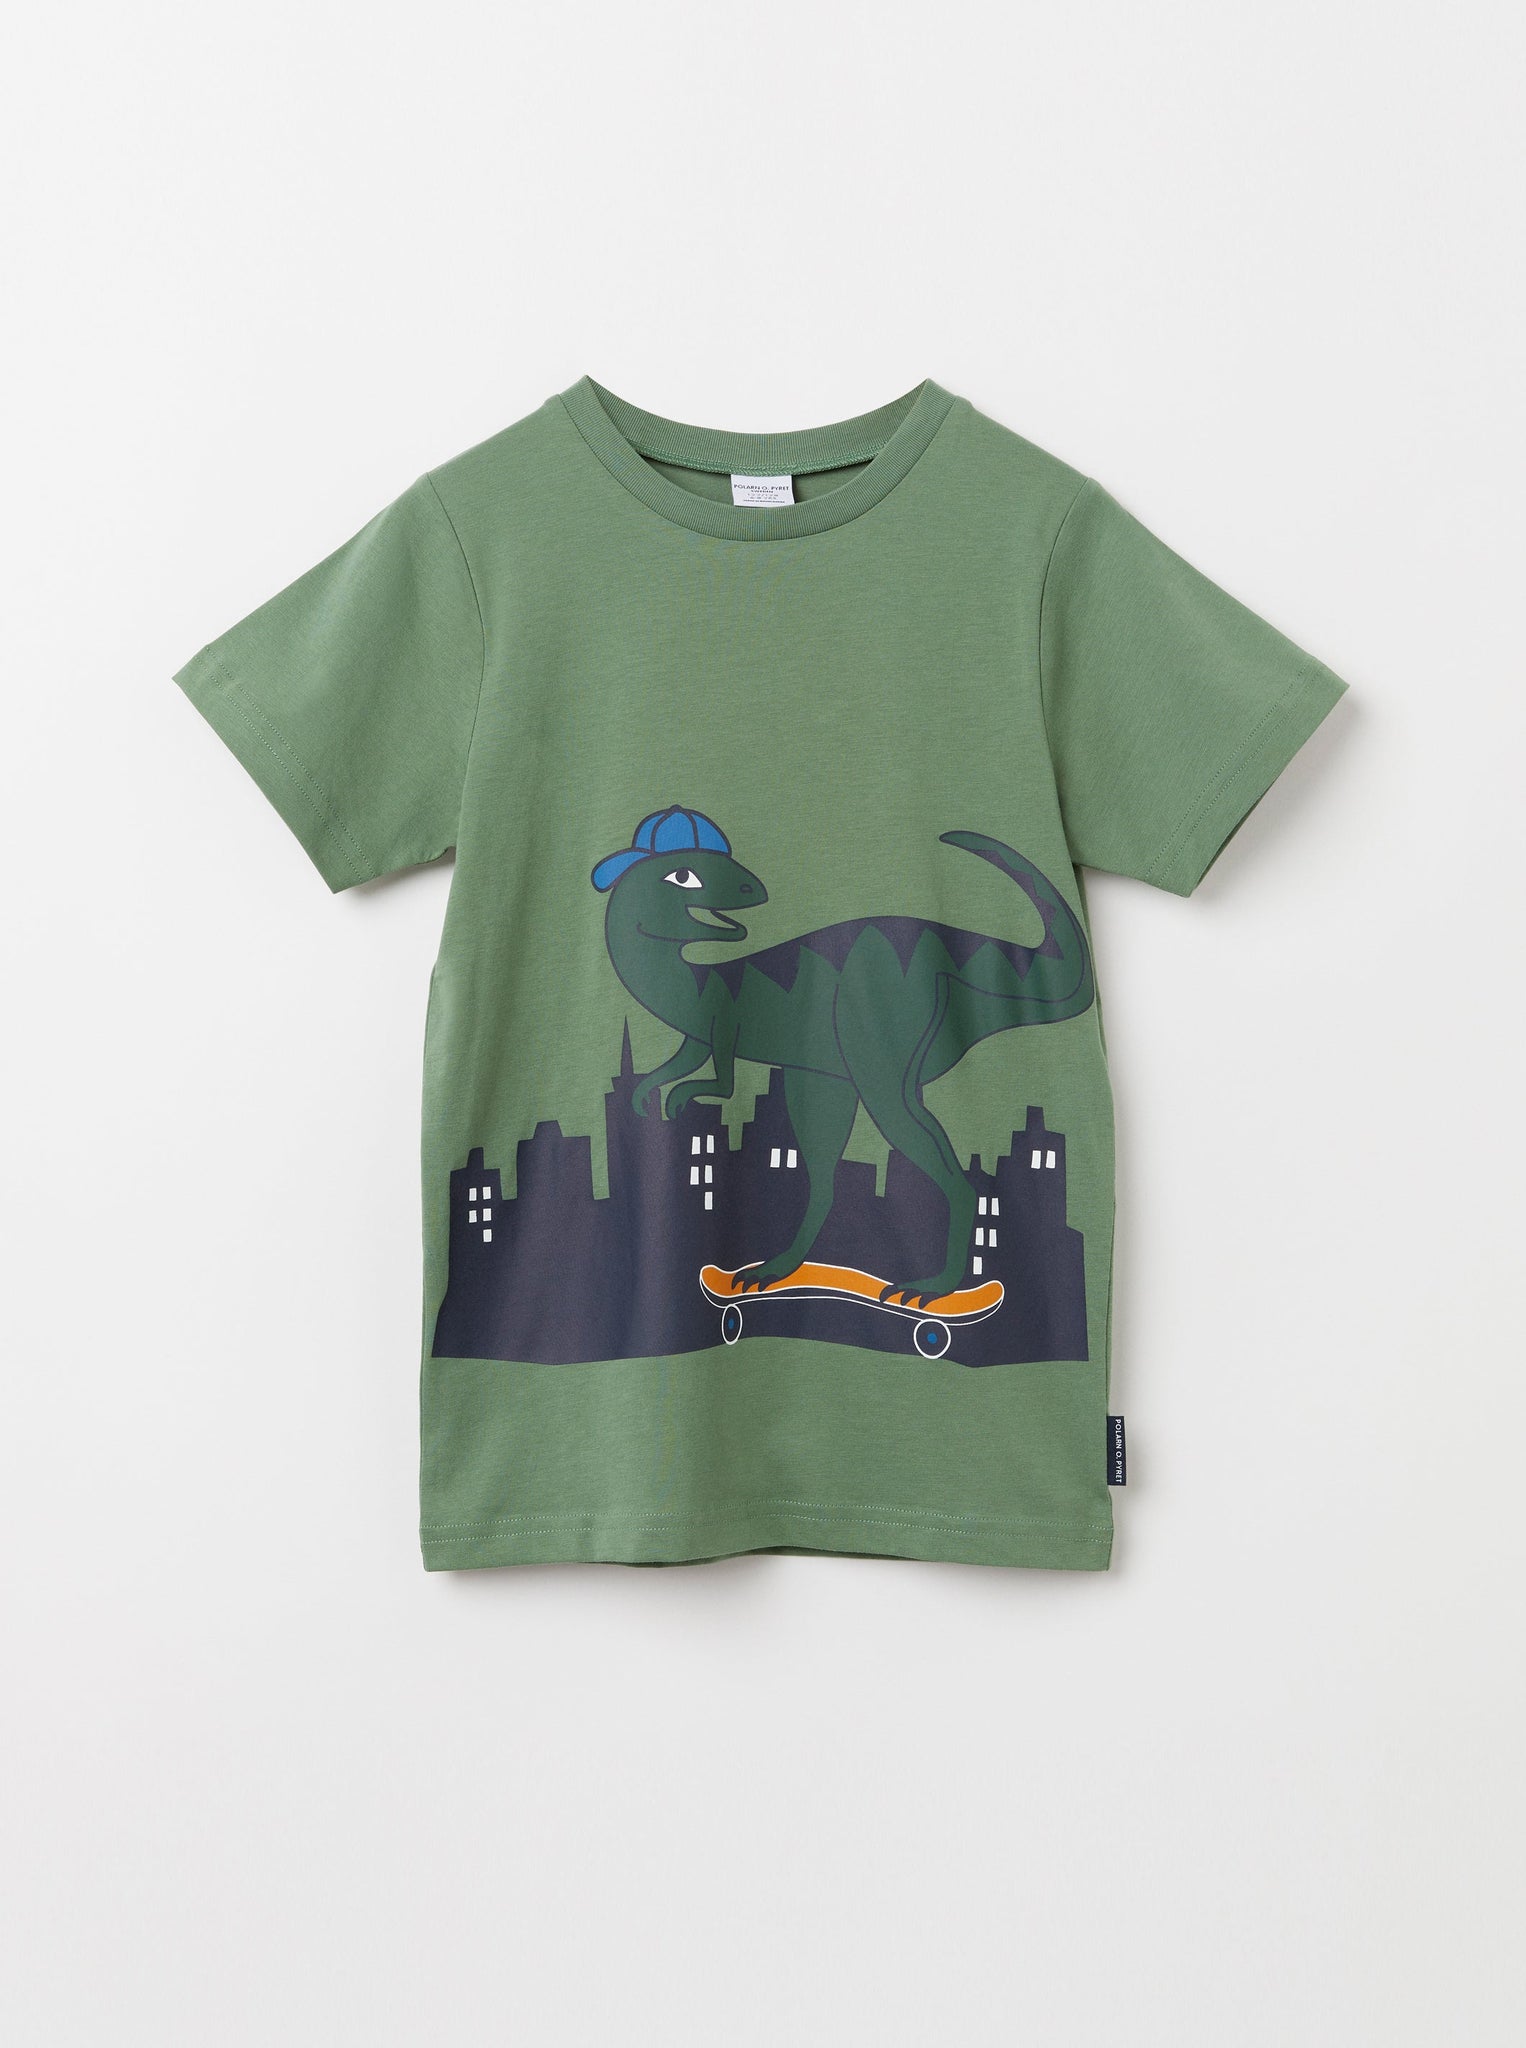 Organic Cotton Dinosaur Kids T-Shirt from the Polarn O. Pyret Kidswear collection. Clothes made using sustainably sourced materials.